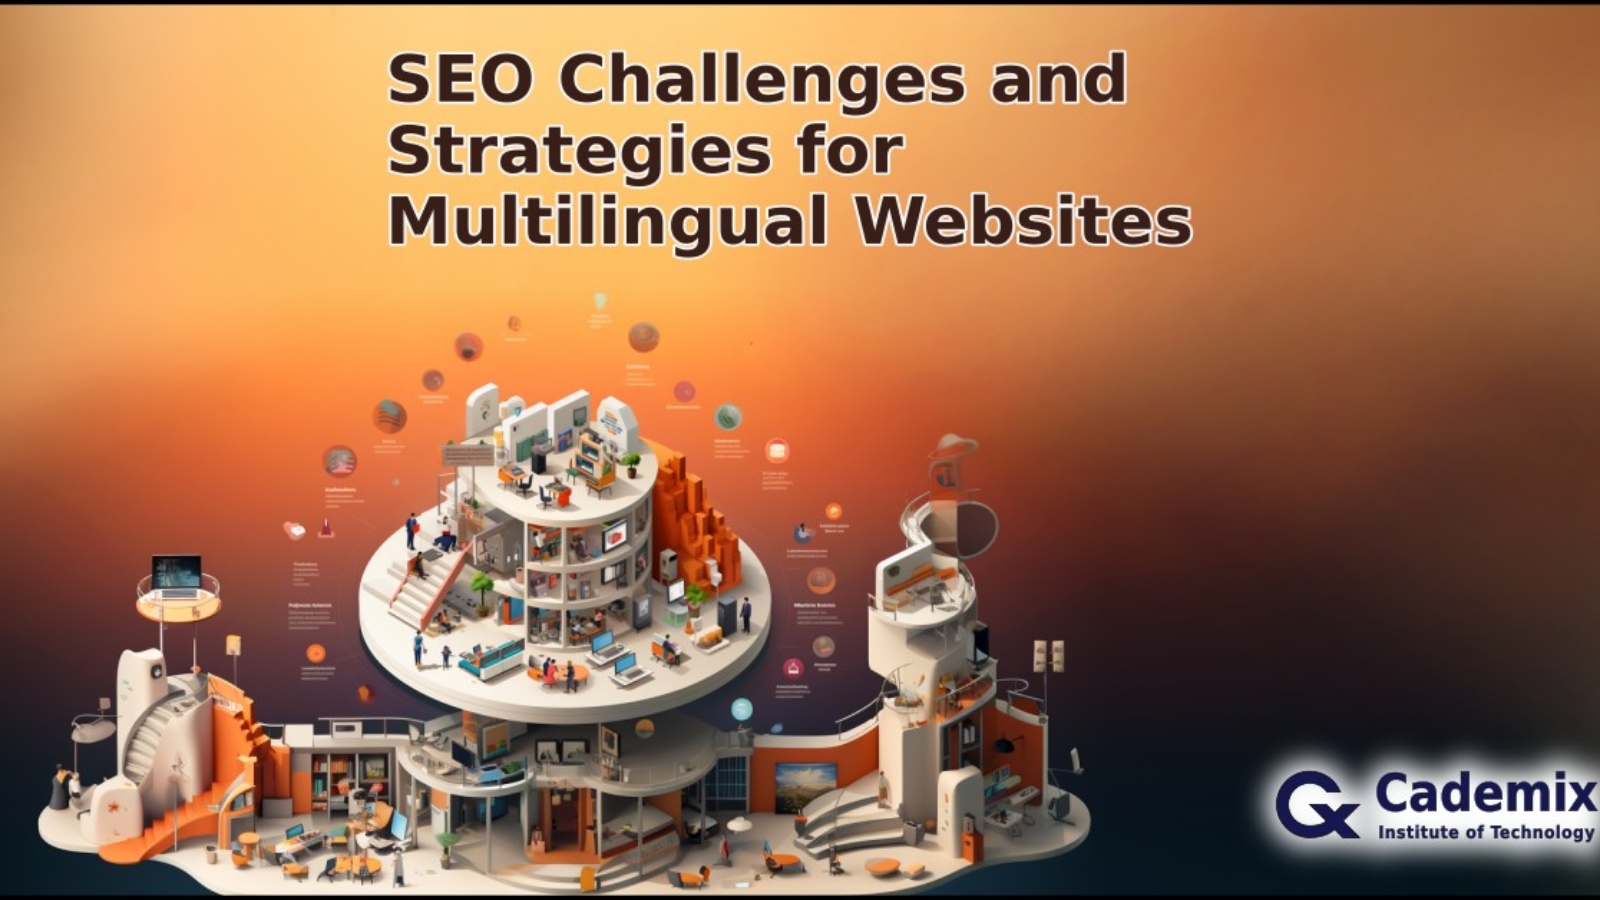 SEO Challenges and Strategies for Multilingual Websites